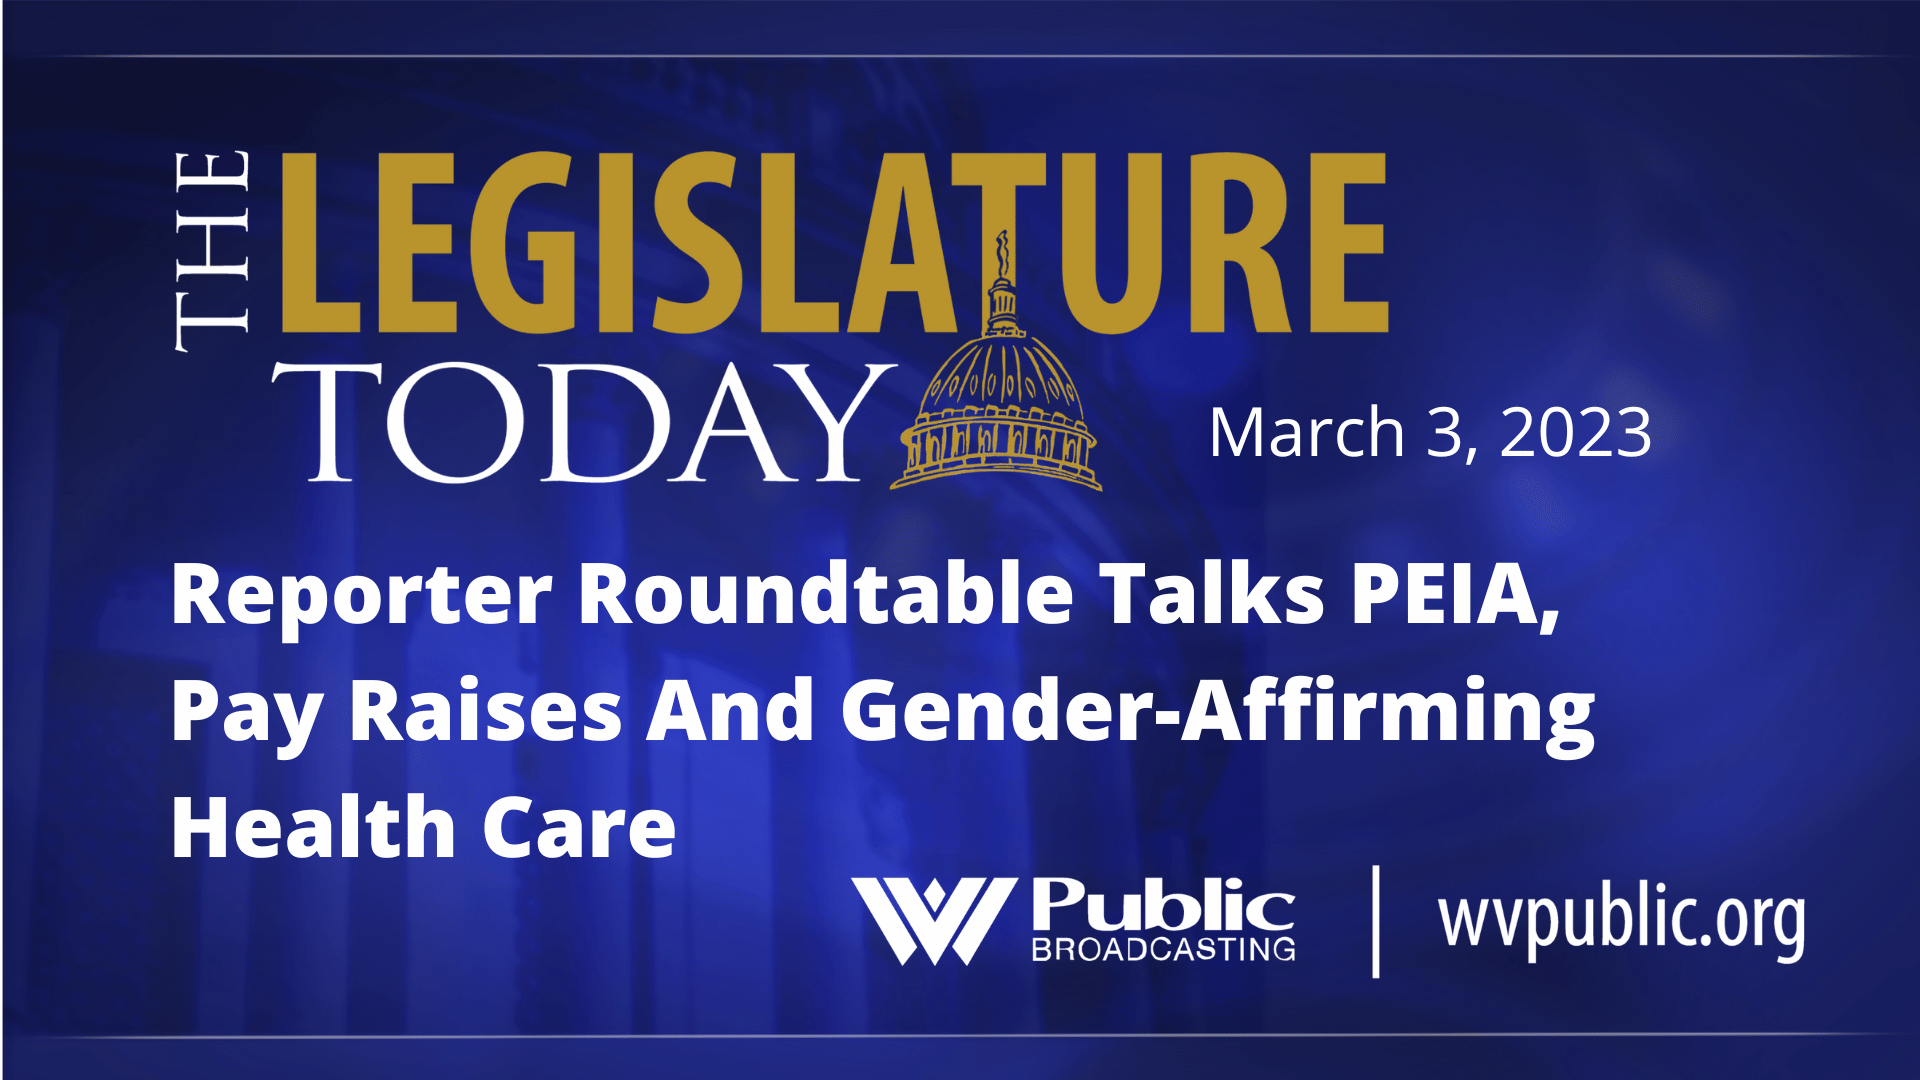 Reporter Roundtable Talks PEIA, Pay Raises And Gender-Affirming Health Care